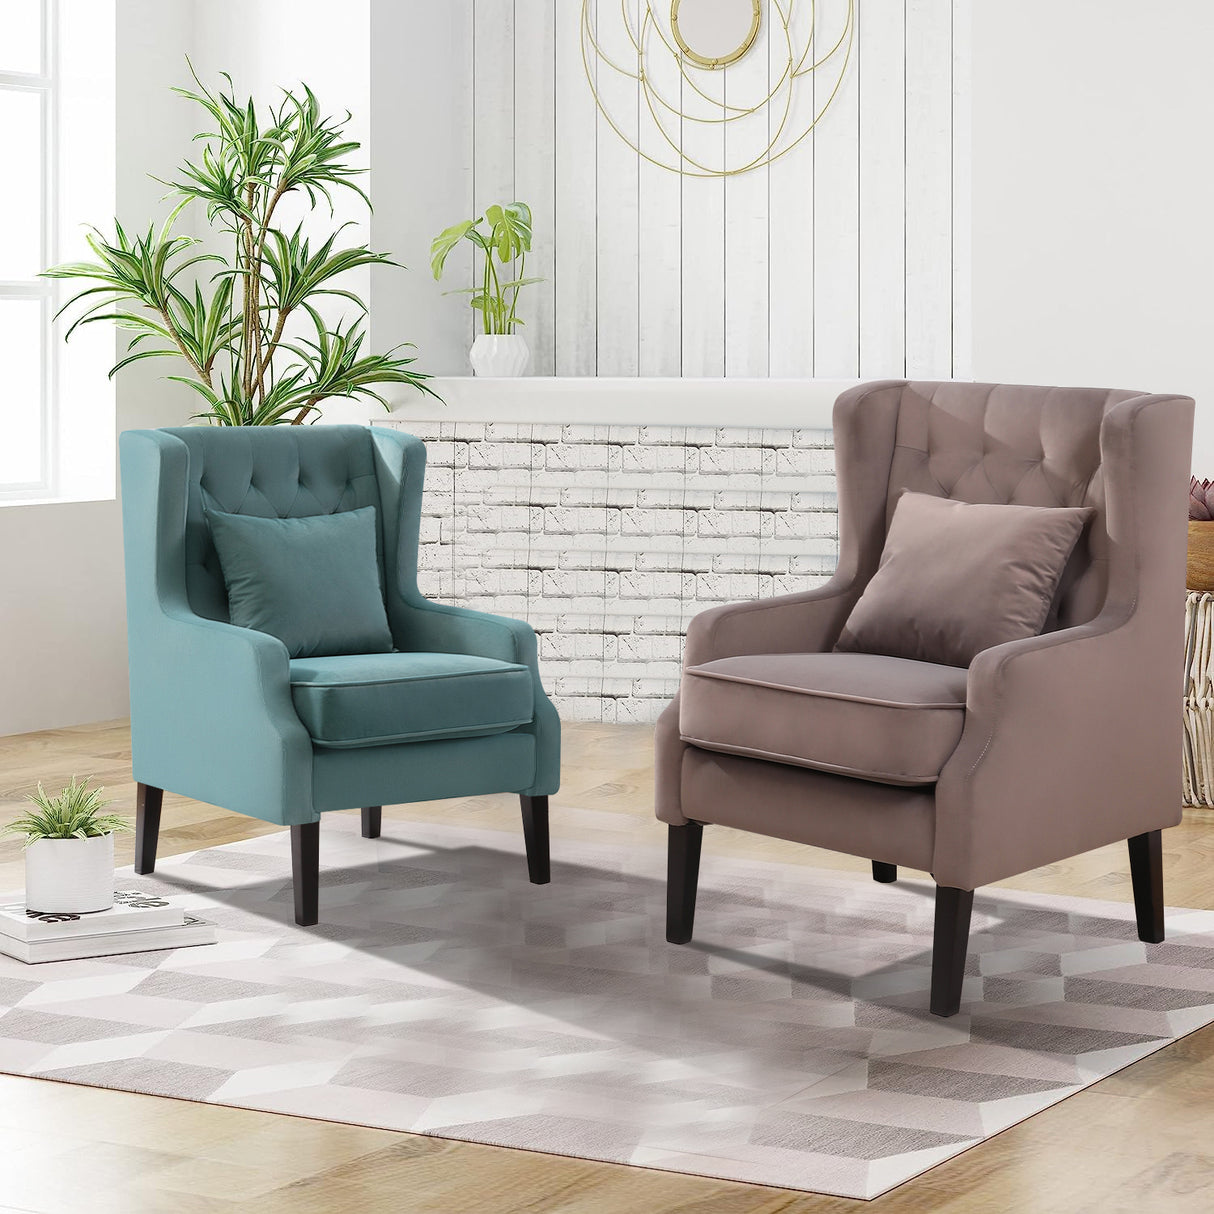 Vanbow.Modern chair with backrest, Bedroom, Living room, Reading chair(Seaweed Green) - Home Elegance USA